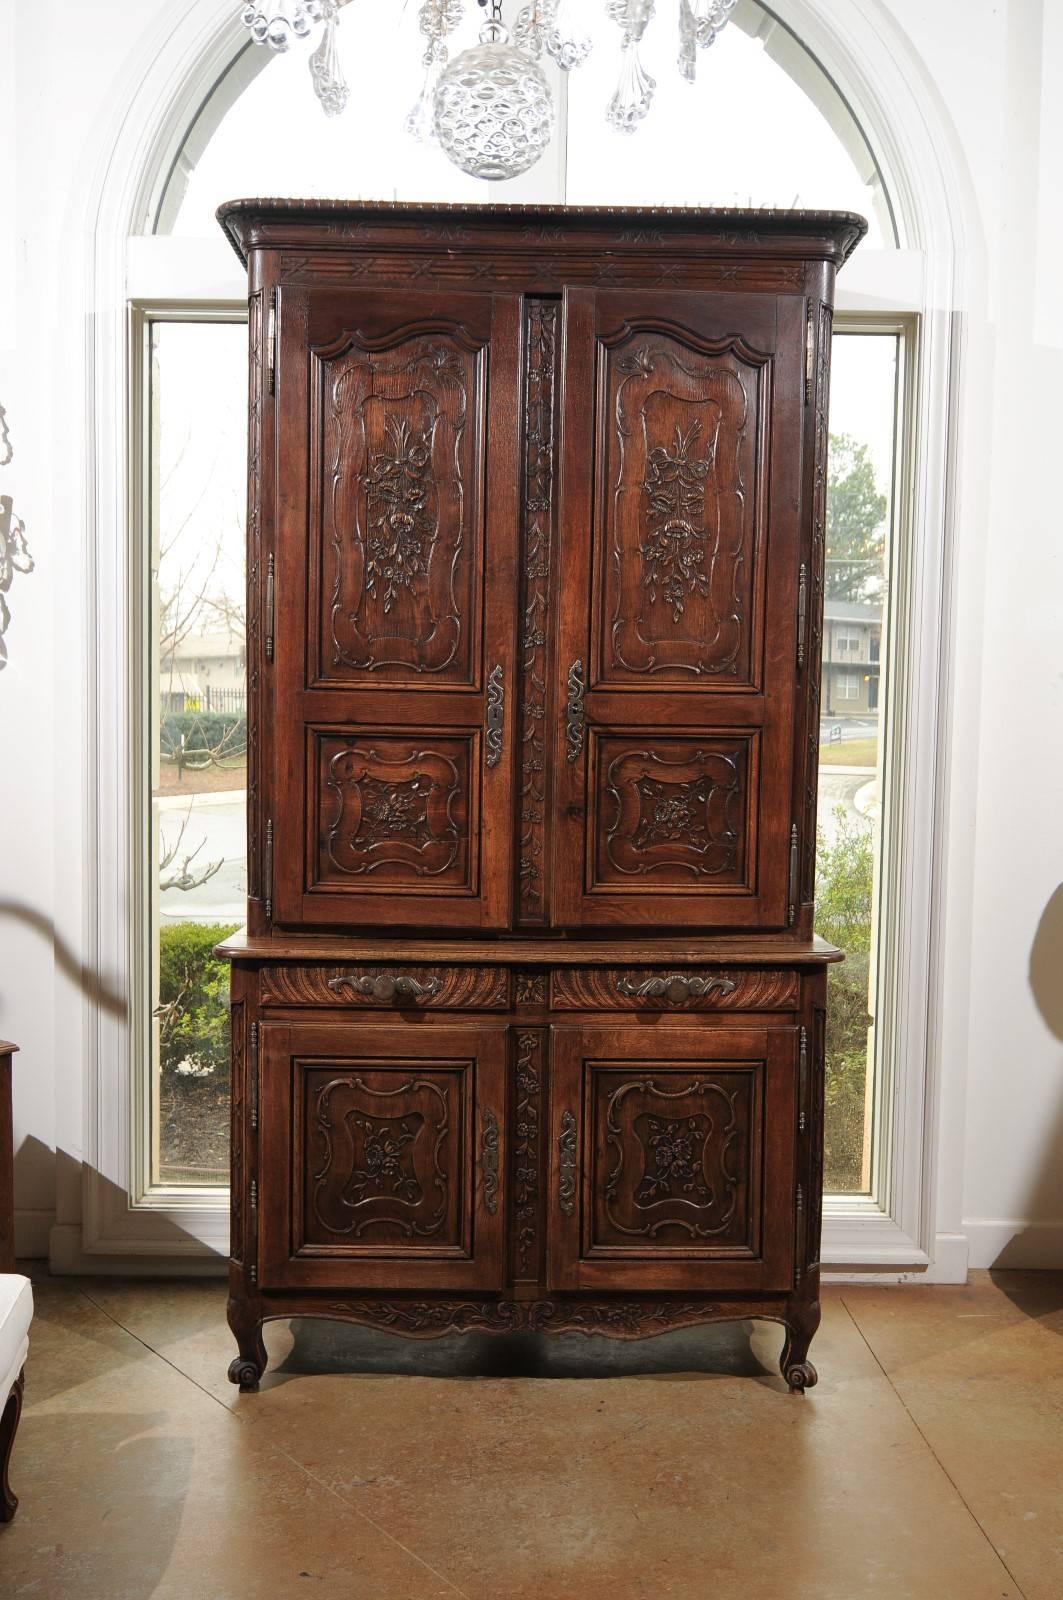 An early 19th century French carved oak buffet à deux-corps from the Picardie region of France. This tall French two-piece cabinet was born in the first decade of the 19th century in the Northern region of Picardie, under the reign of Emperor